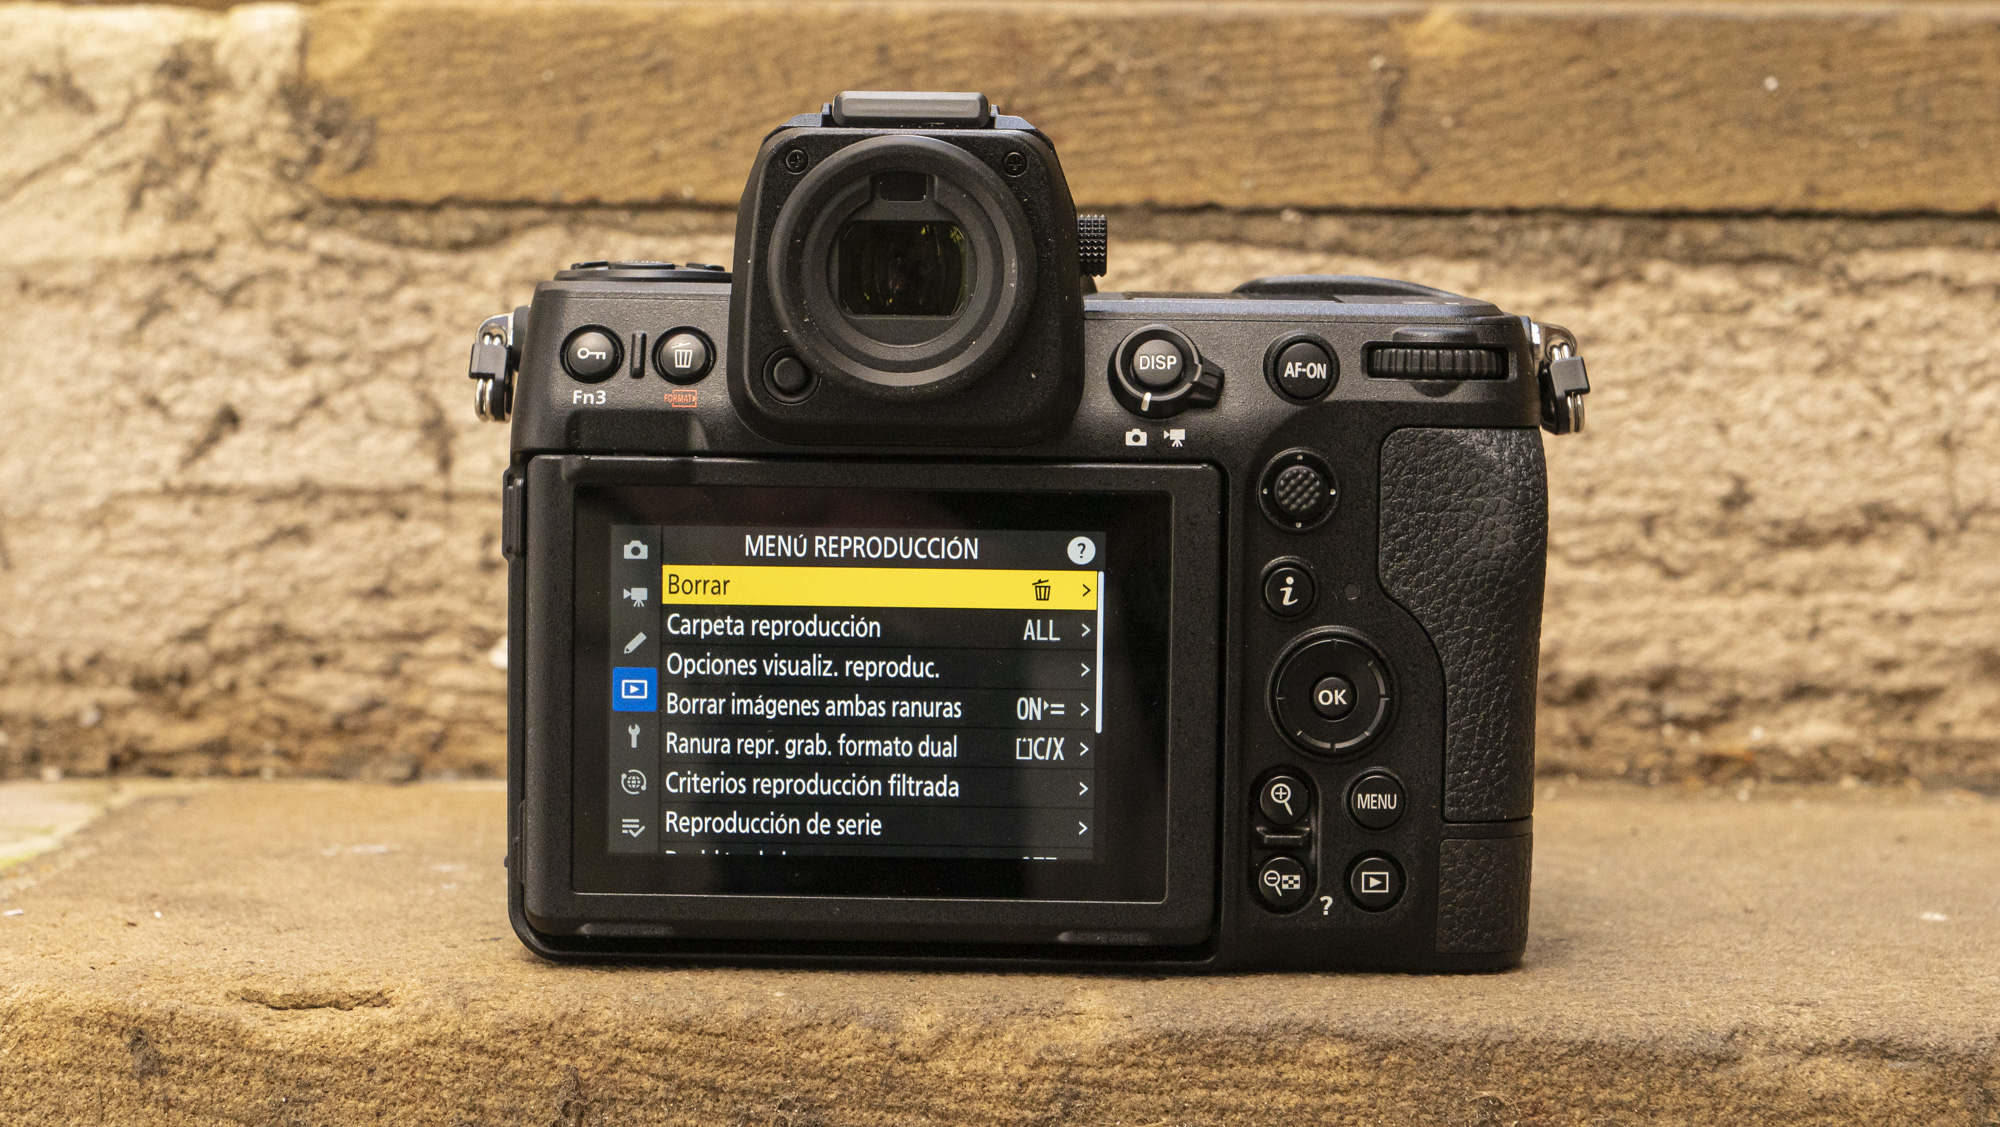 Nikon Z8 camera outside on the ground with rear screen on